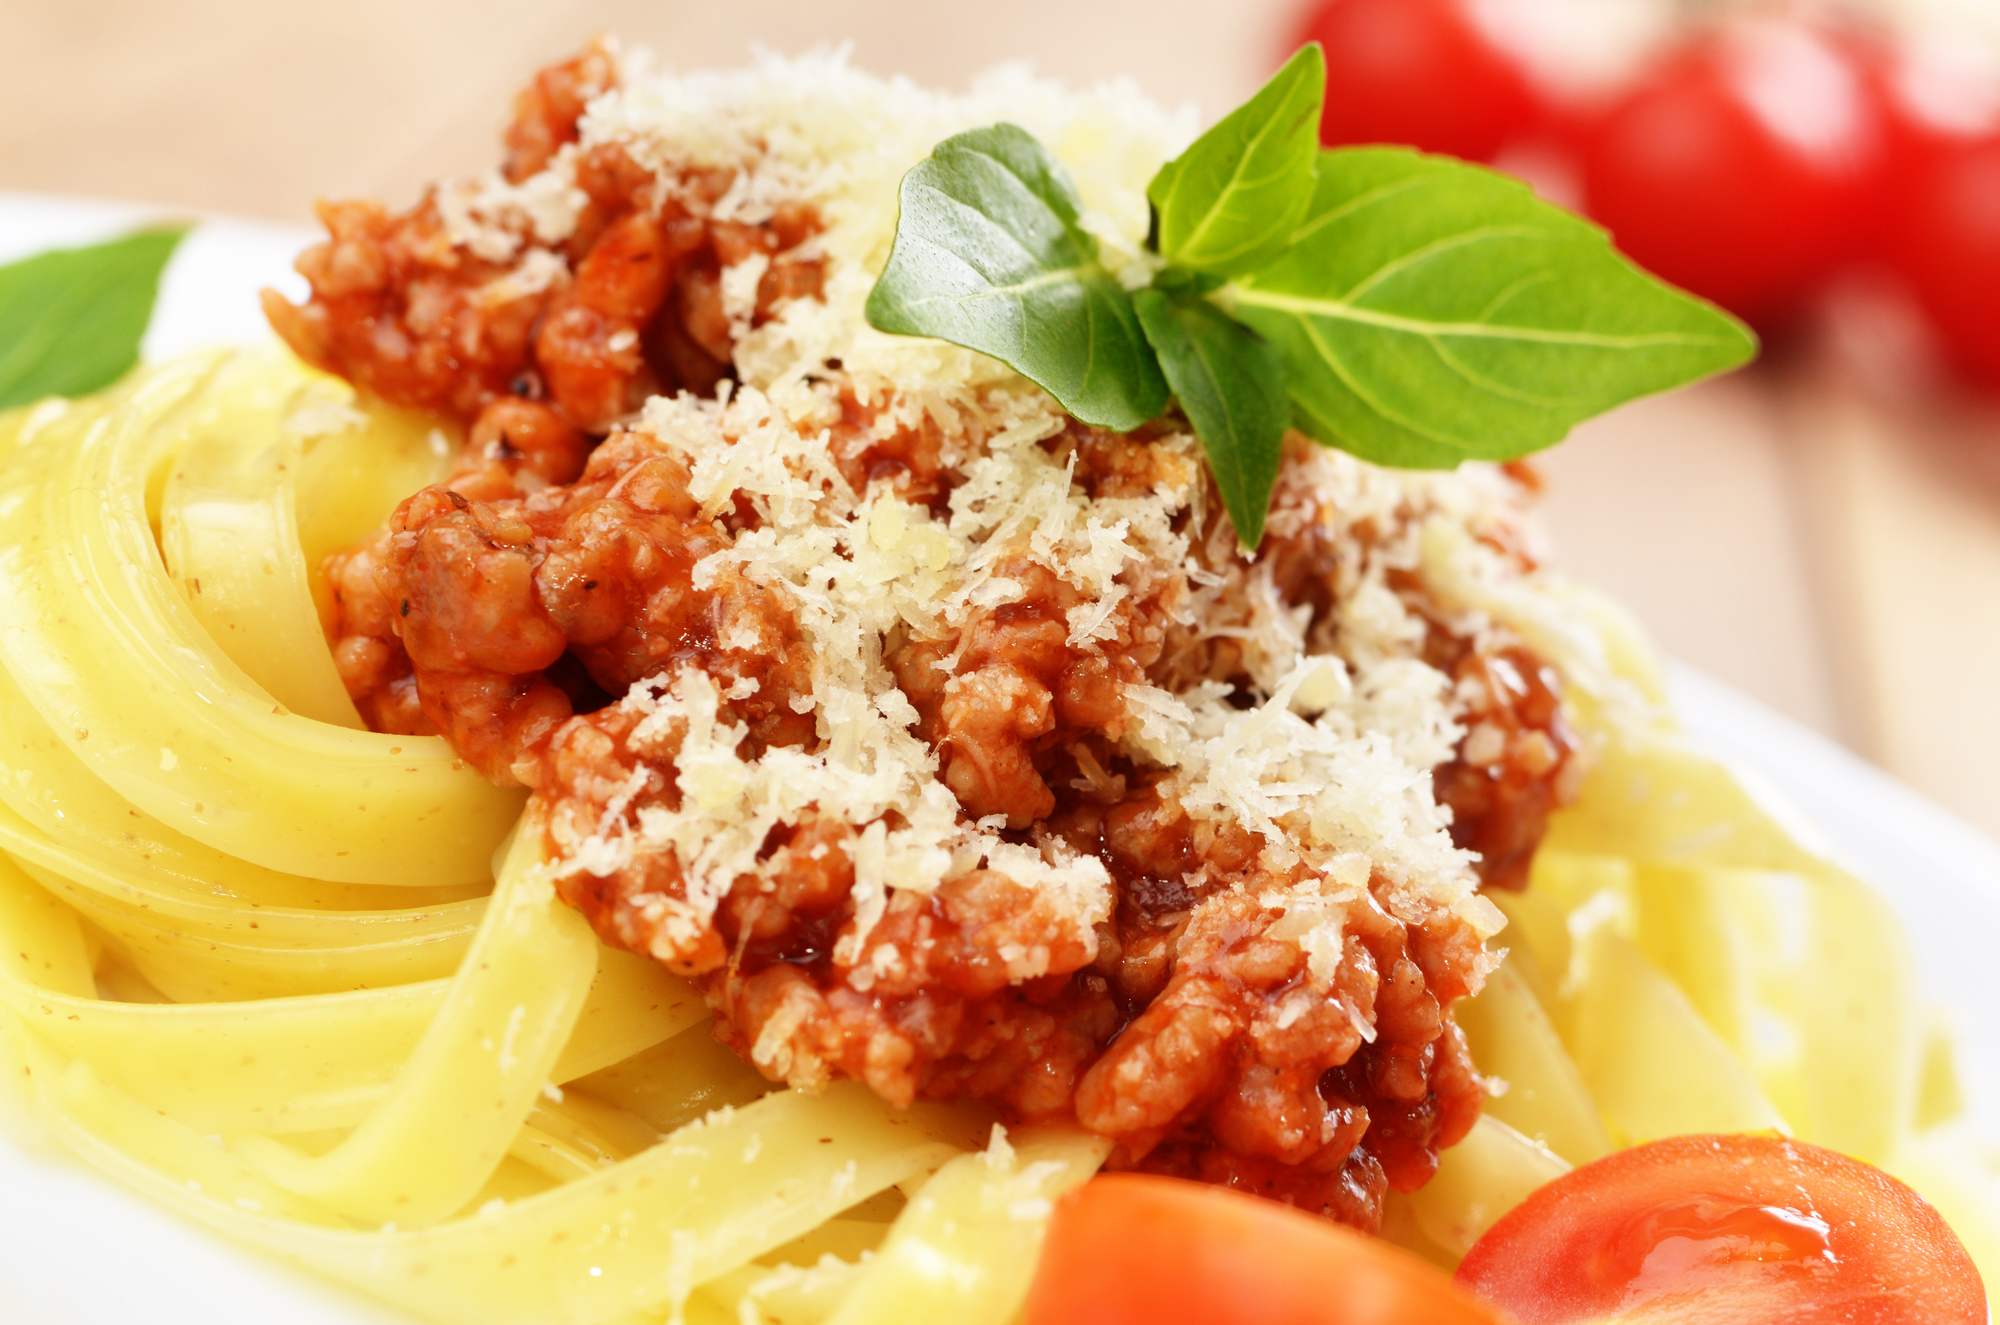 Pasta tagliatelle with beef sauce and parmesan